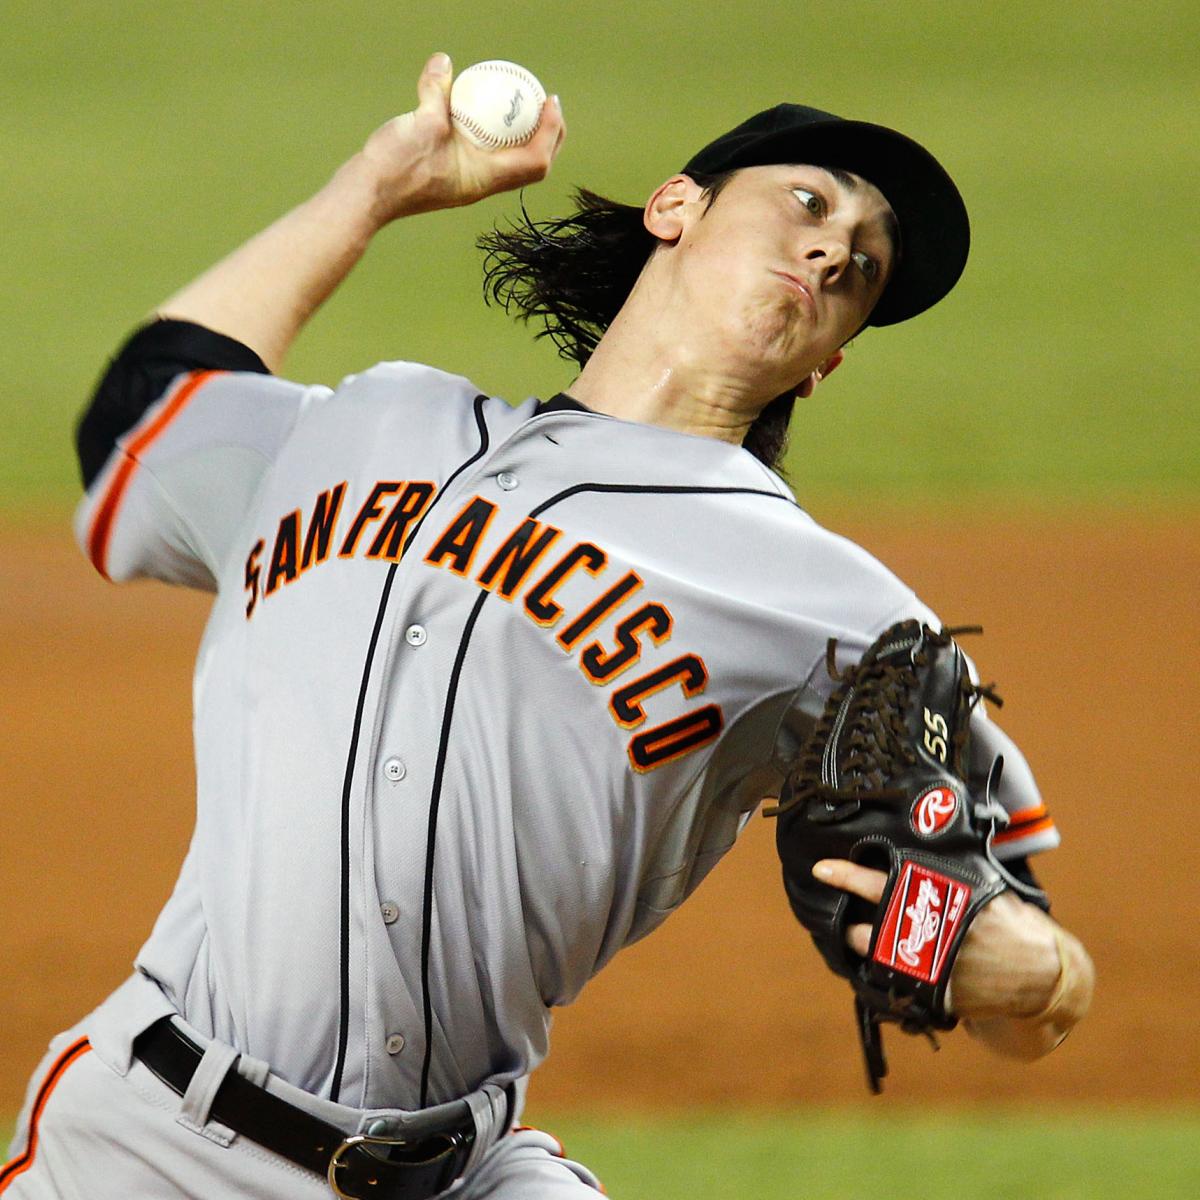 Giants pitcher Lincecum faces marijuana charge after traffic stop